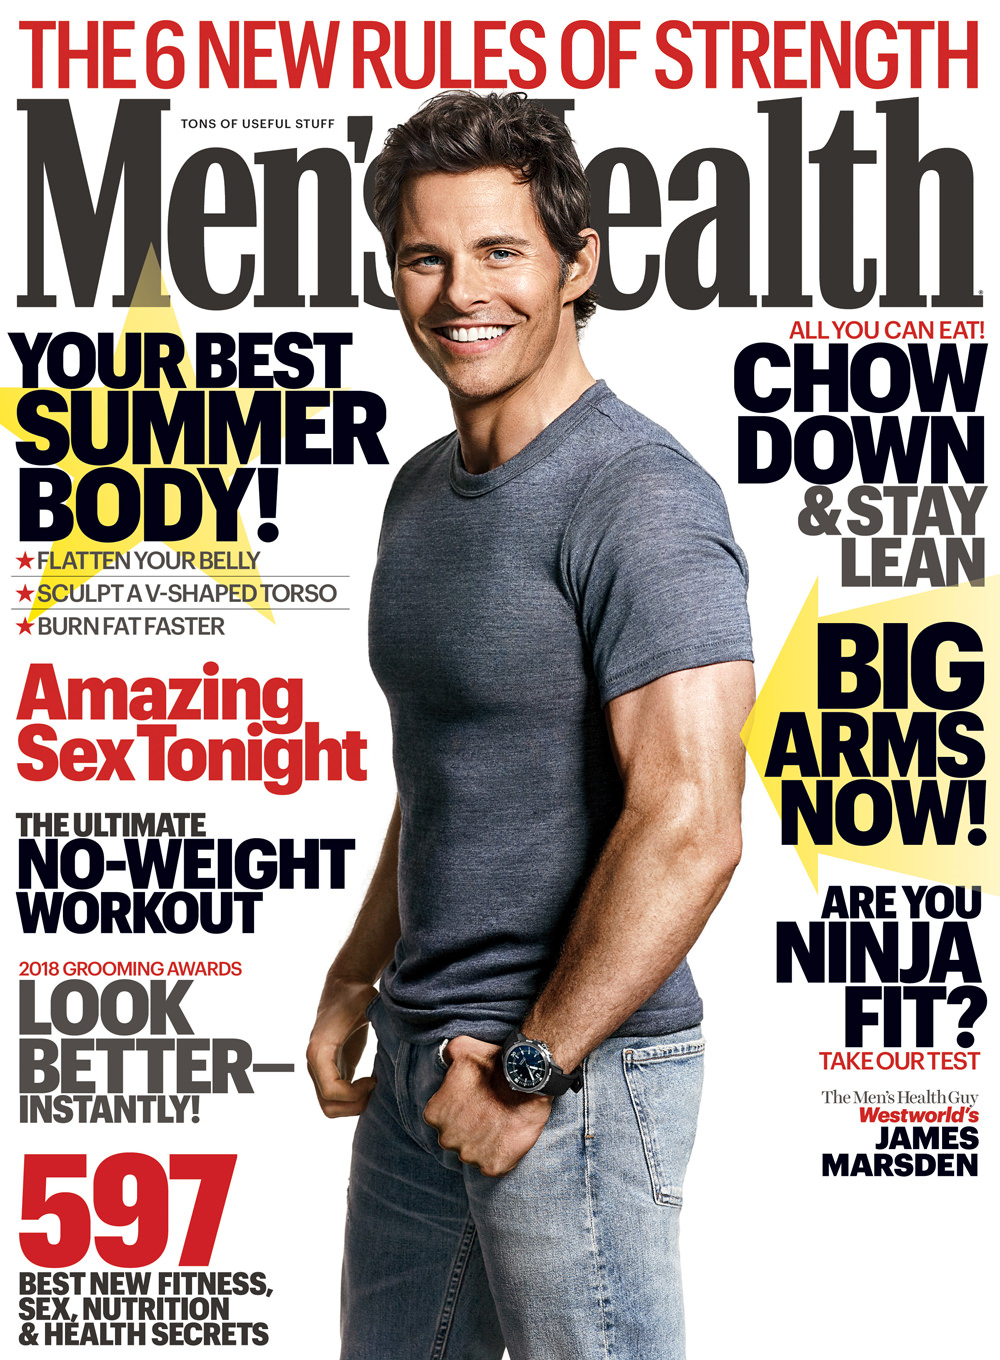 Westworld Star James Marsden Covers June Issue Of Mens Health